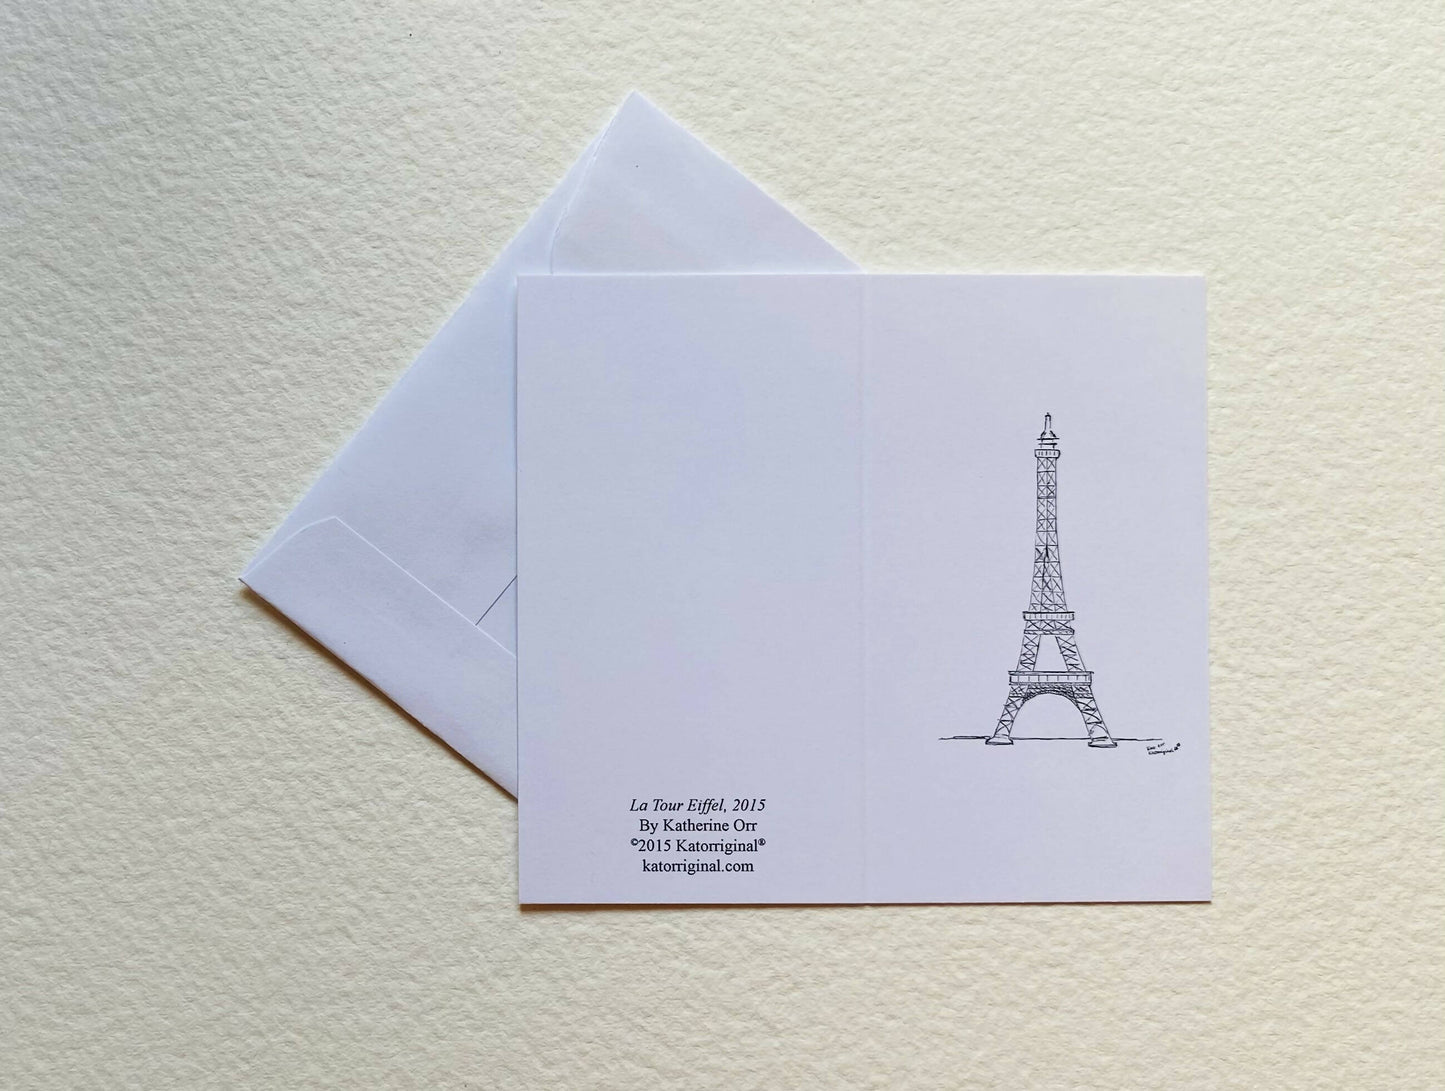 Small Giftcards "La Tour Eiffel" by Katherine Orr